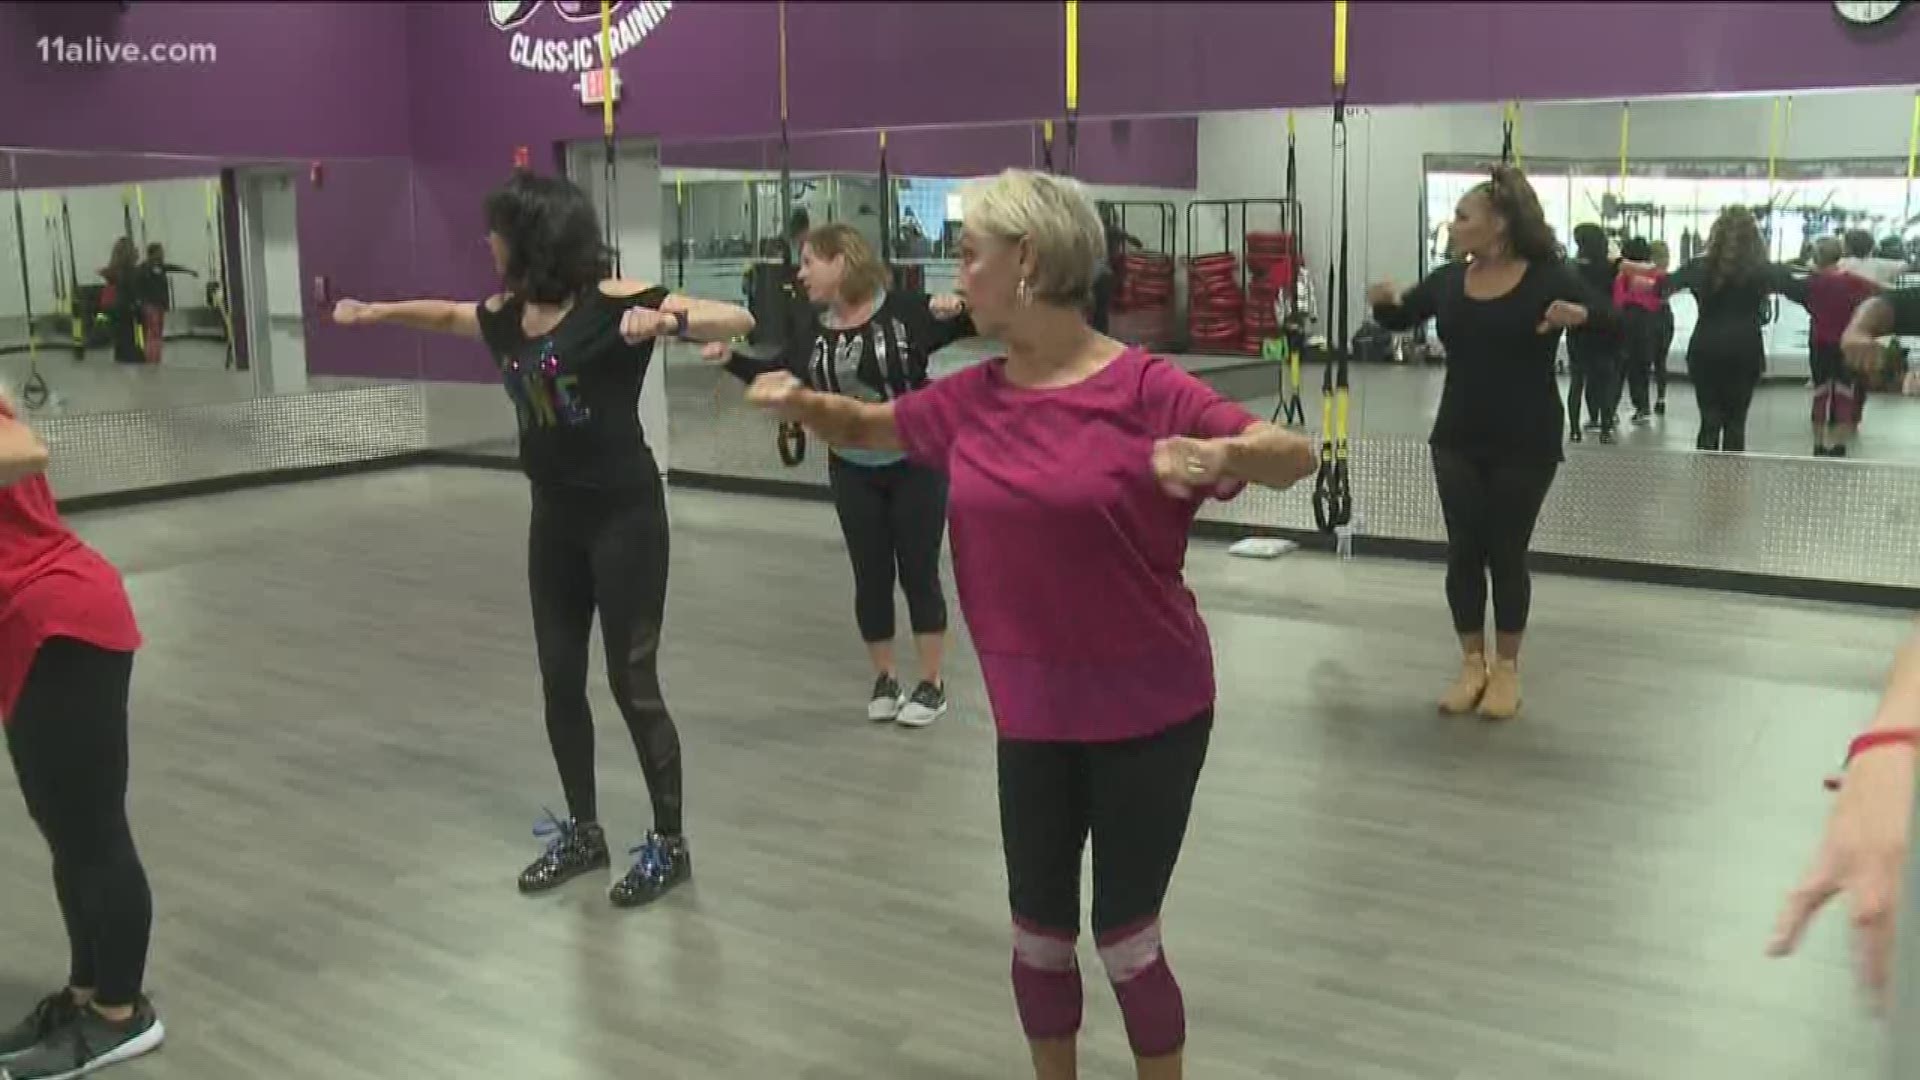 Atlanta's first hip hop dance crew for senior citizens can be seen in music videos and at half time for NBA games. The Silver Classix Crew told their story to Shiba Russell for her Elevating Atlanta series on Morning Rush.